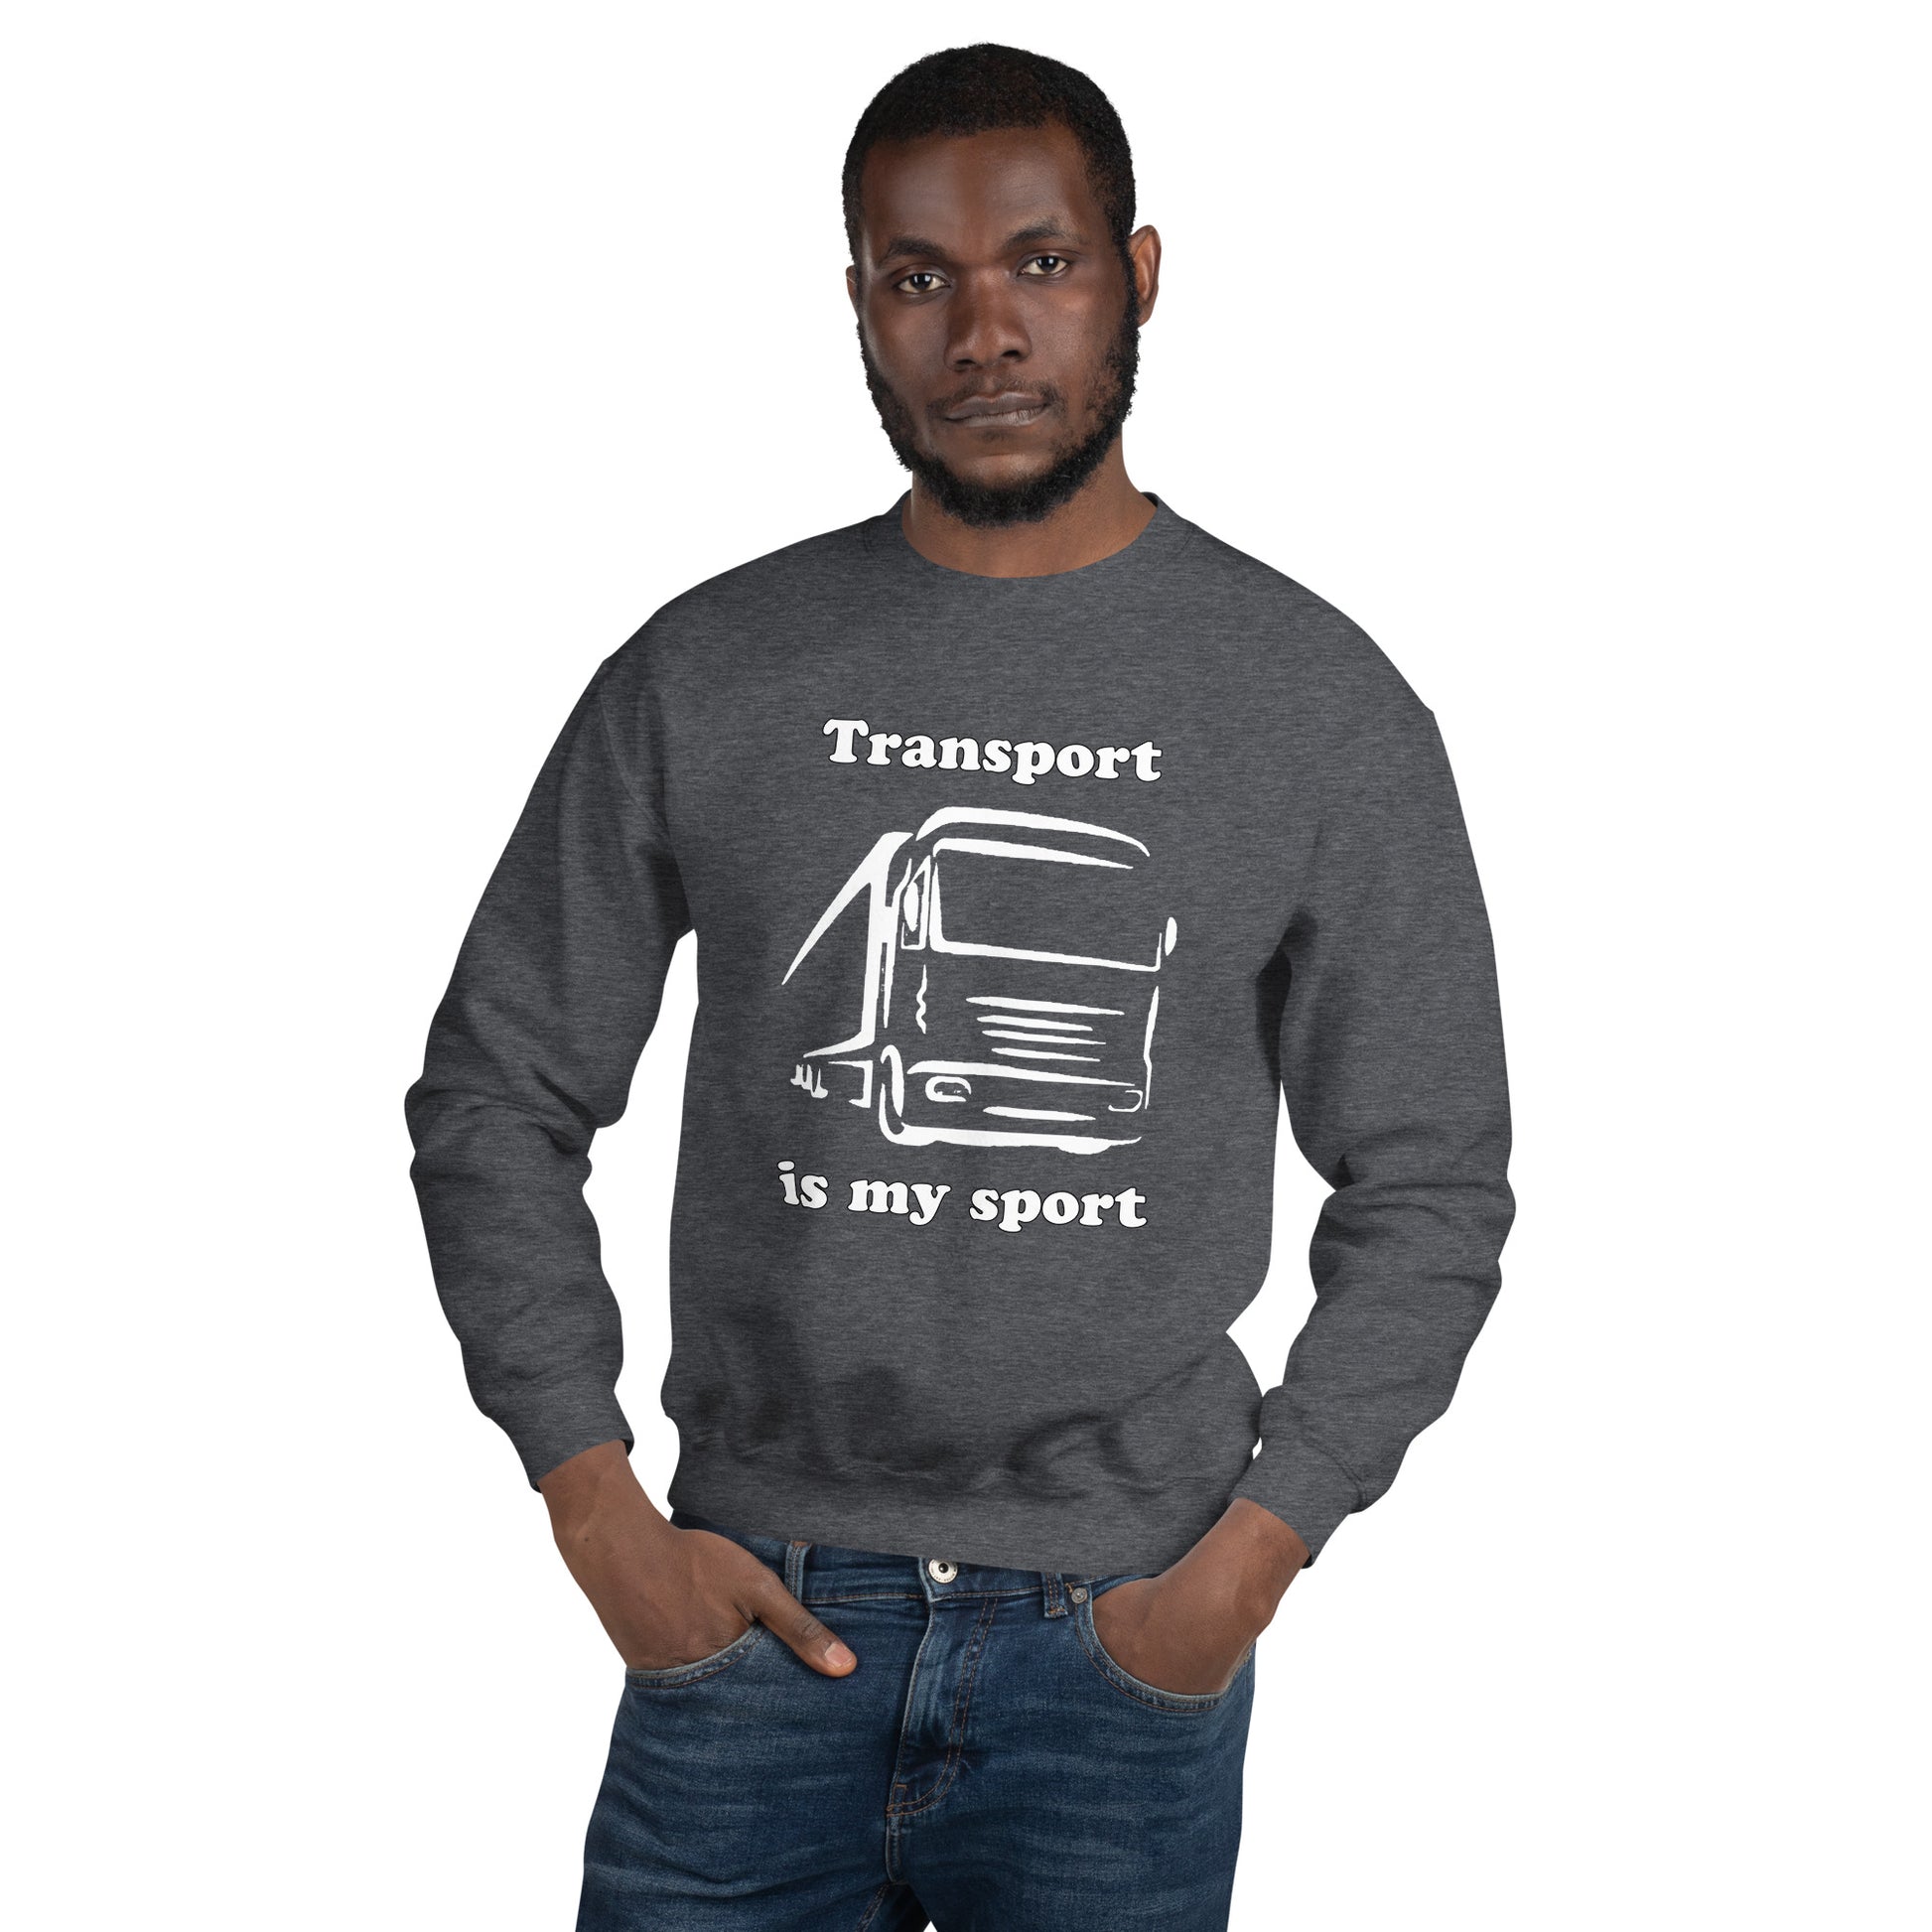 Man with grey sweatshirt with picture of truck and text "Transport is my sport"